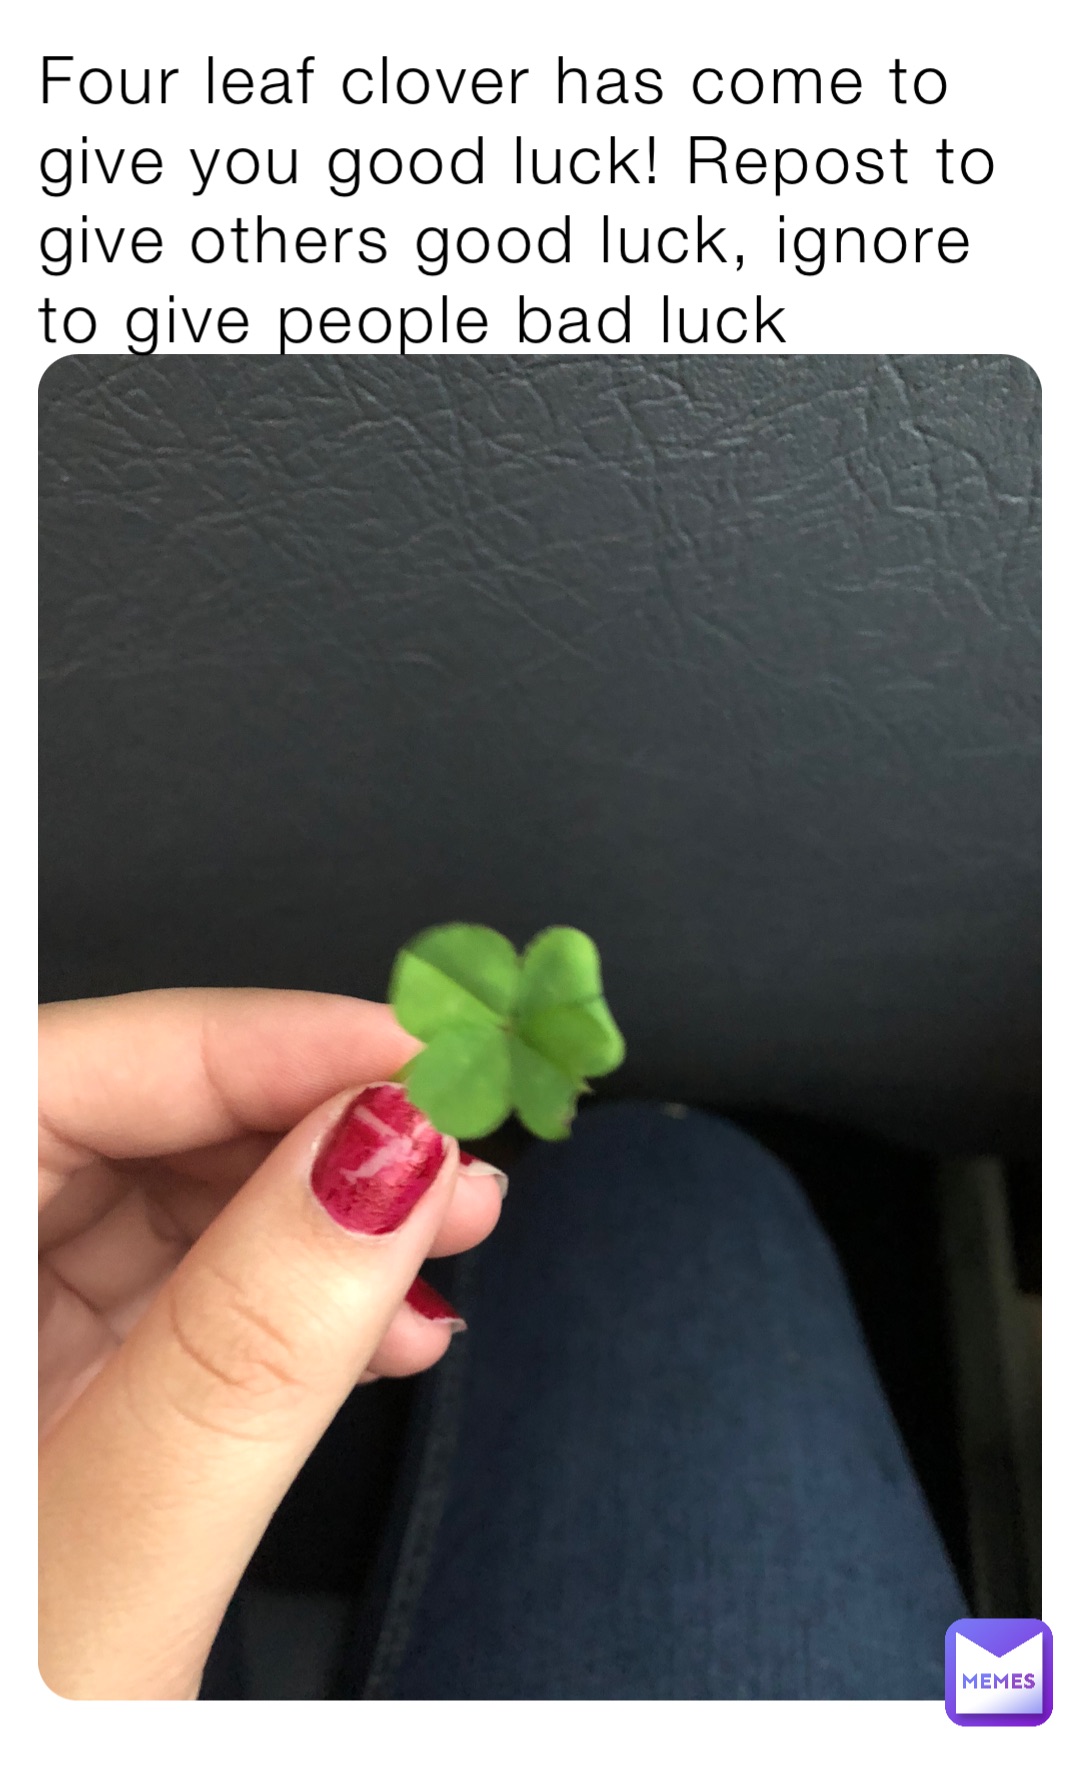 Four leaf clover has come to give you good luck! Repost to give others good luck, ignore to give people bad luck